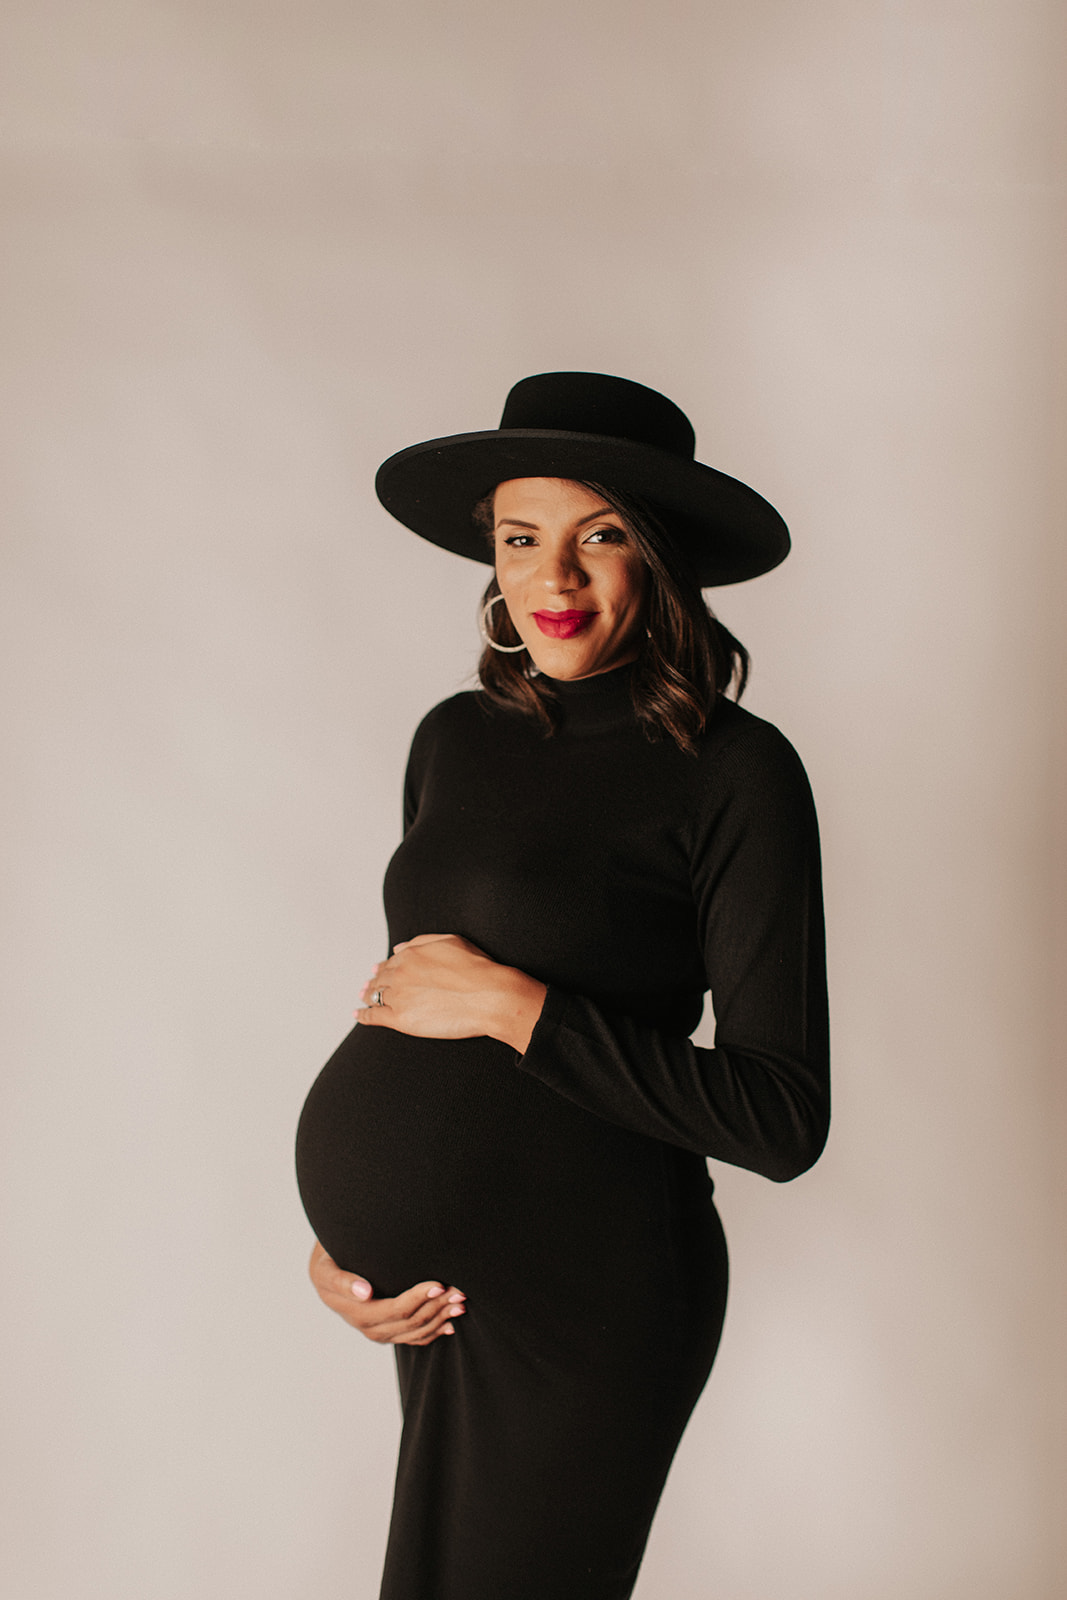 Timeless Maternity Session by Megan Shaw Photography featured on Nashville Baby Guide